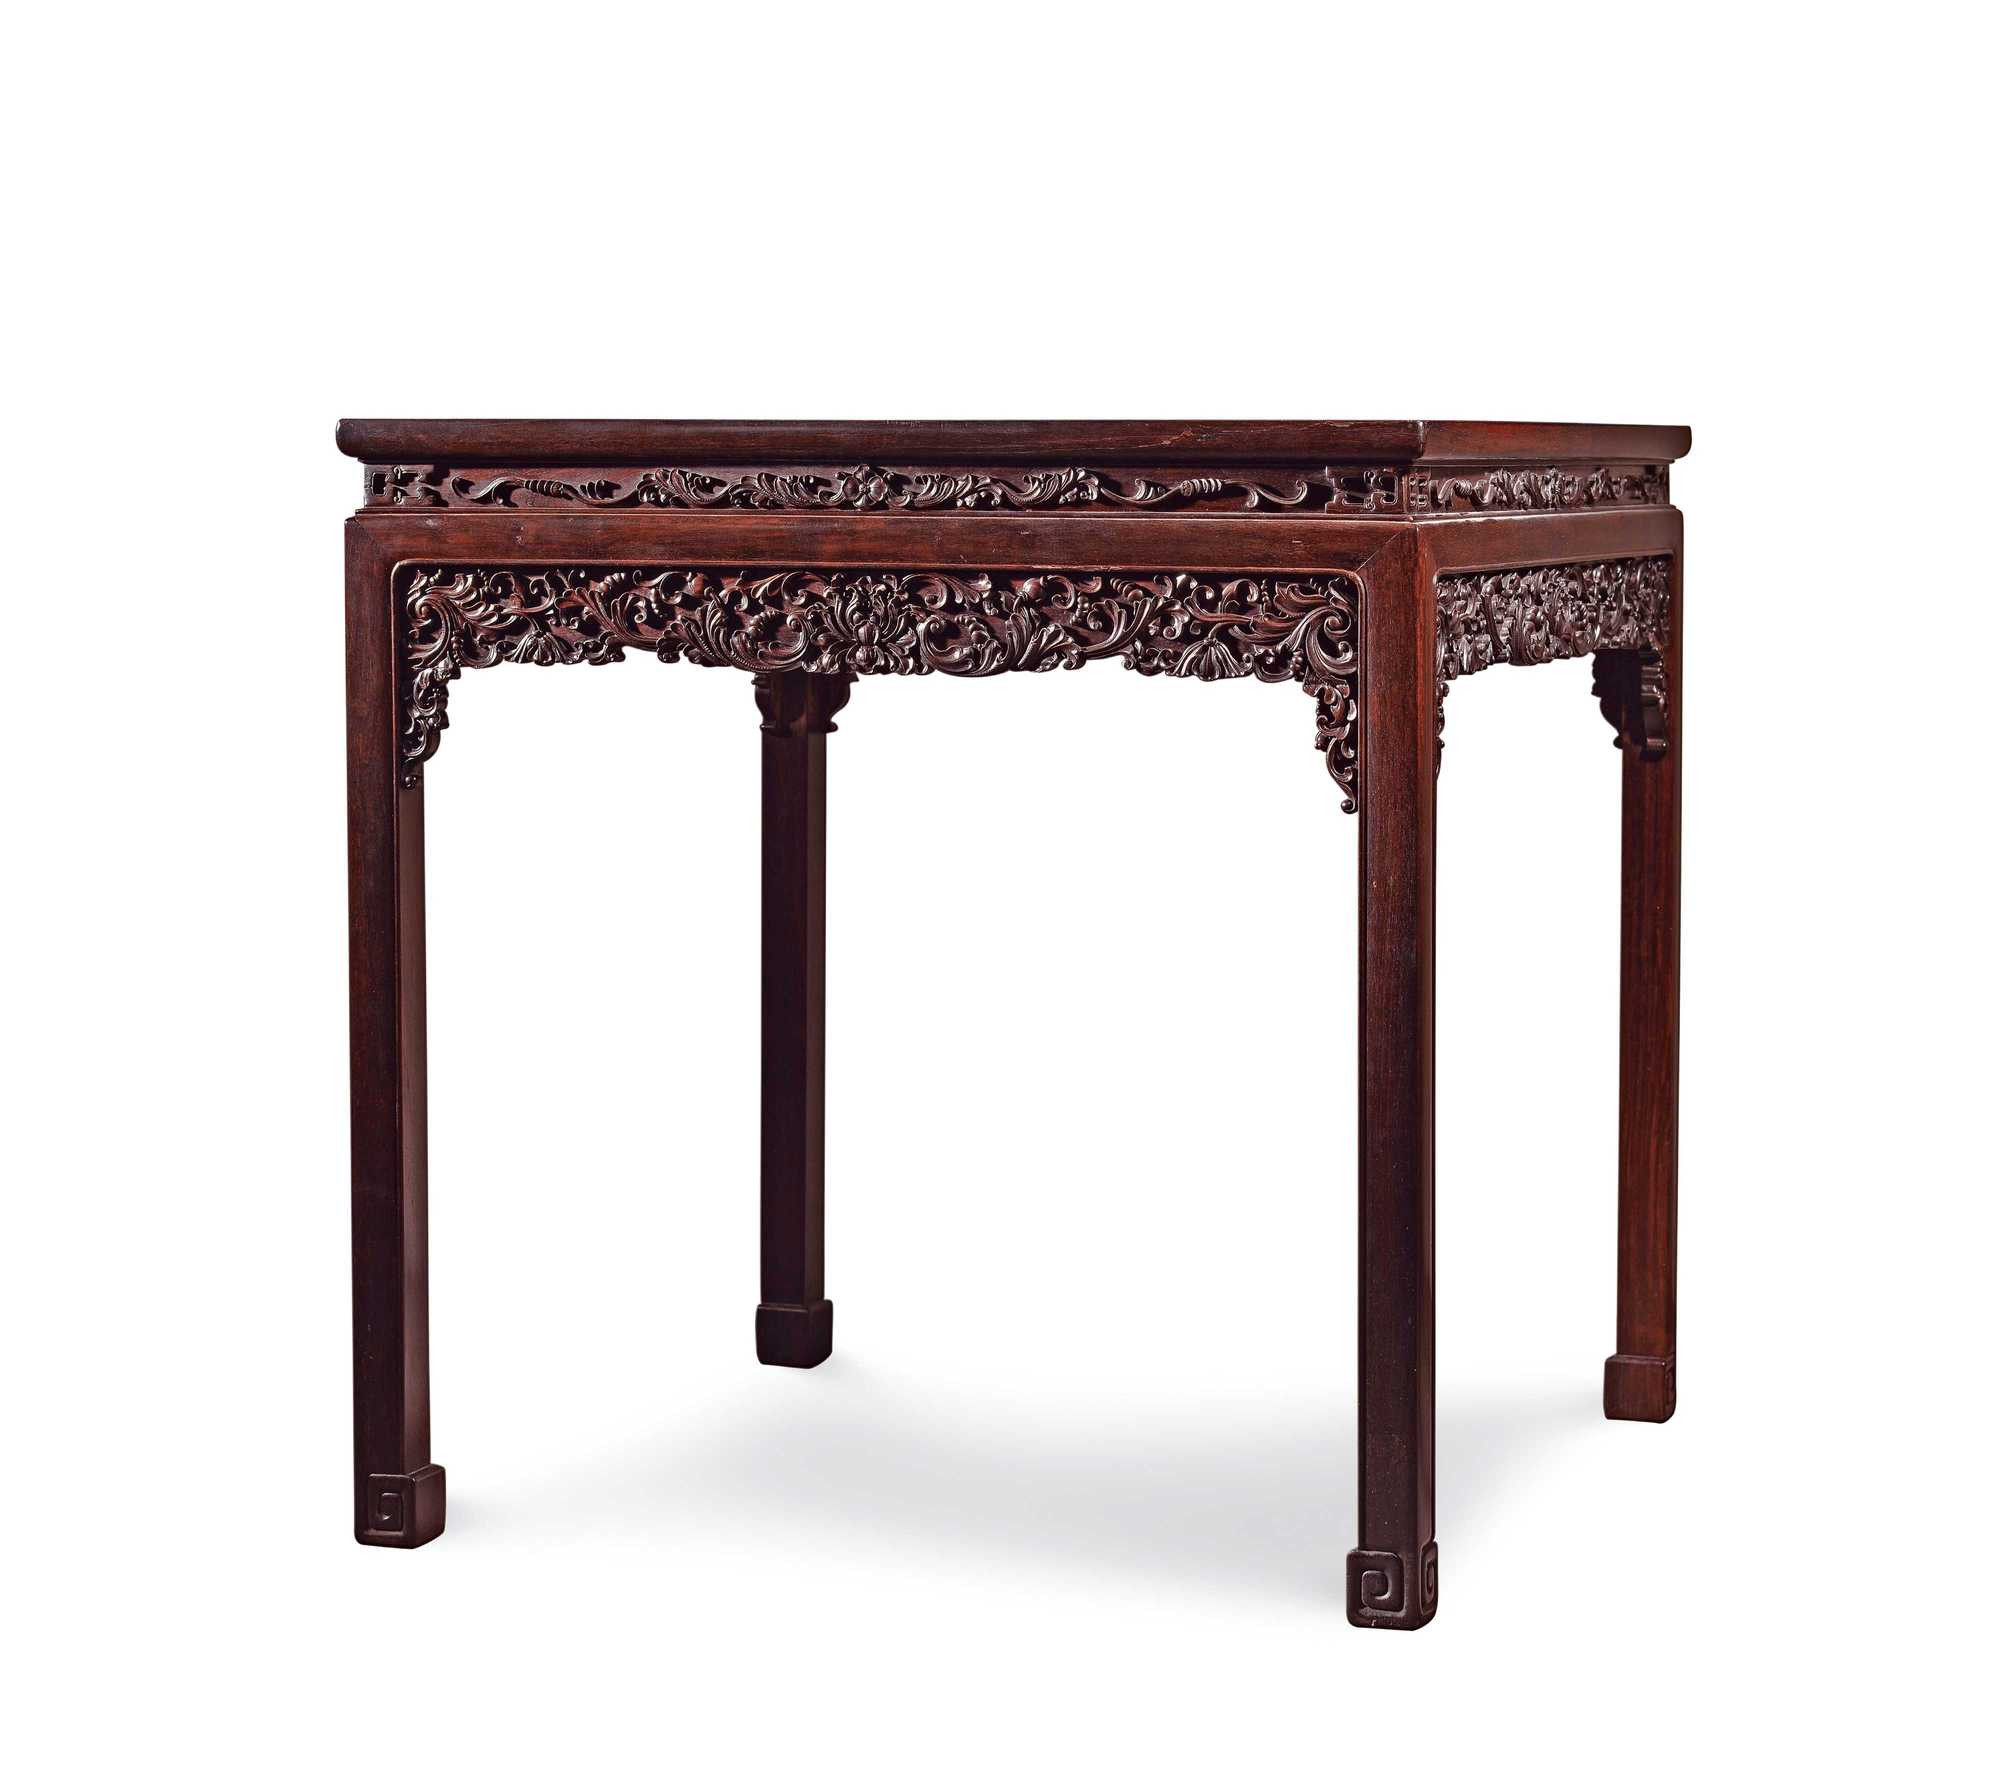 RED SANDALWOOD HIGH WAIST SQUARE TABLE WITH PASSION FLOWER PATTERN